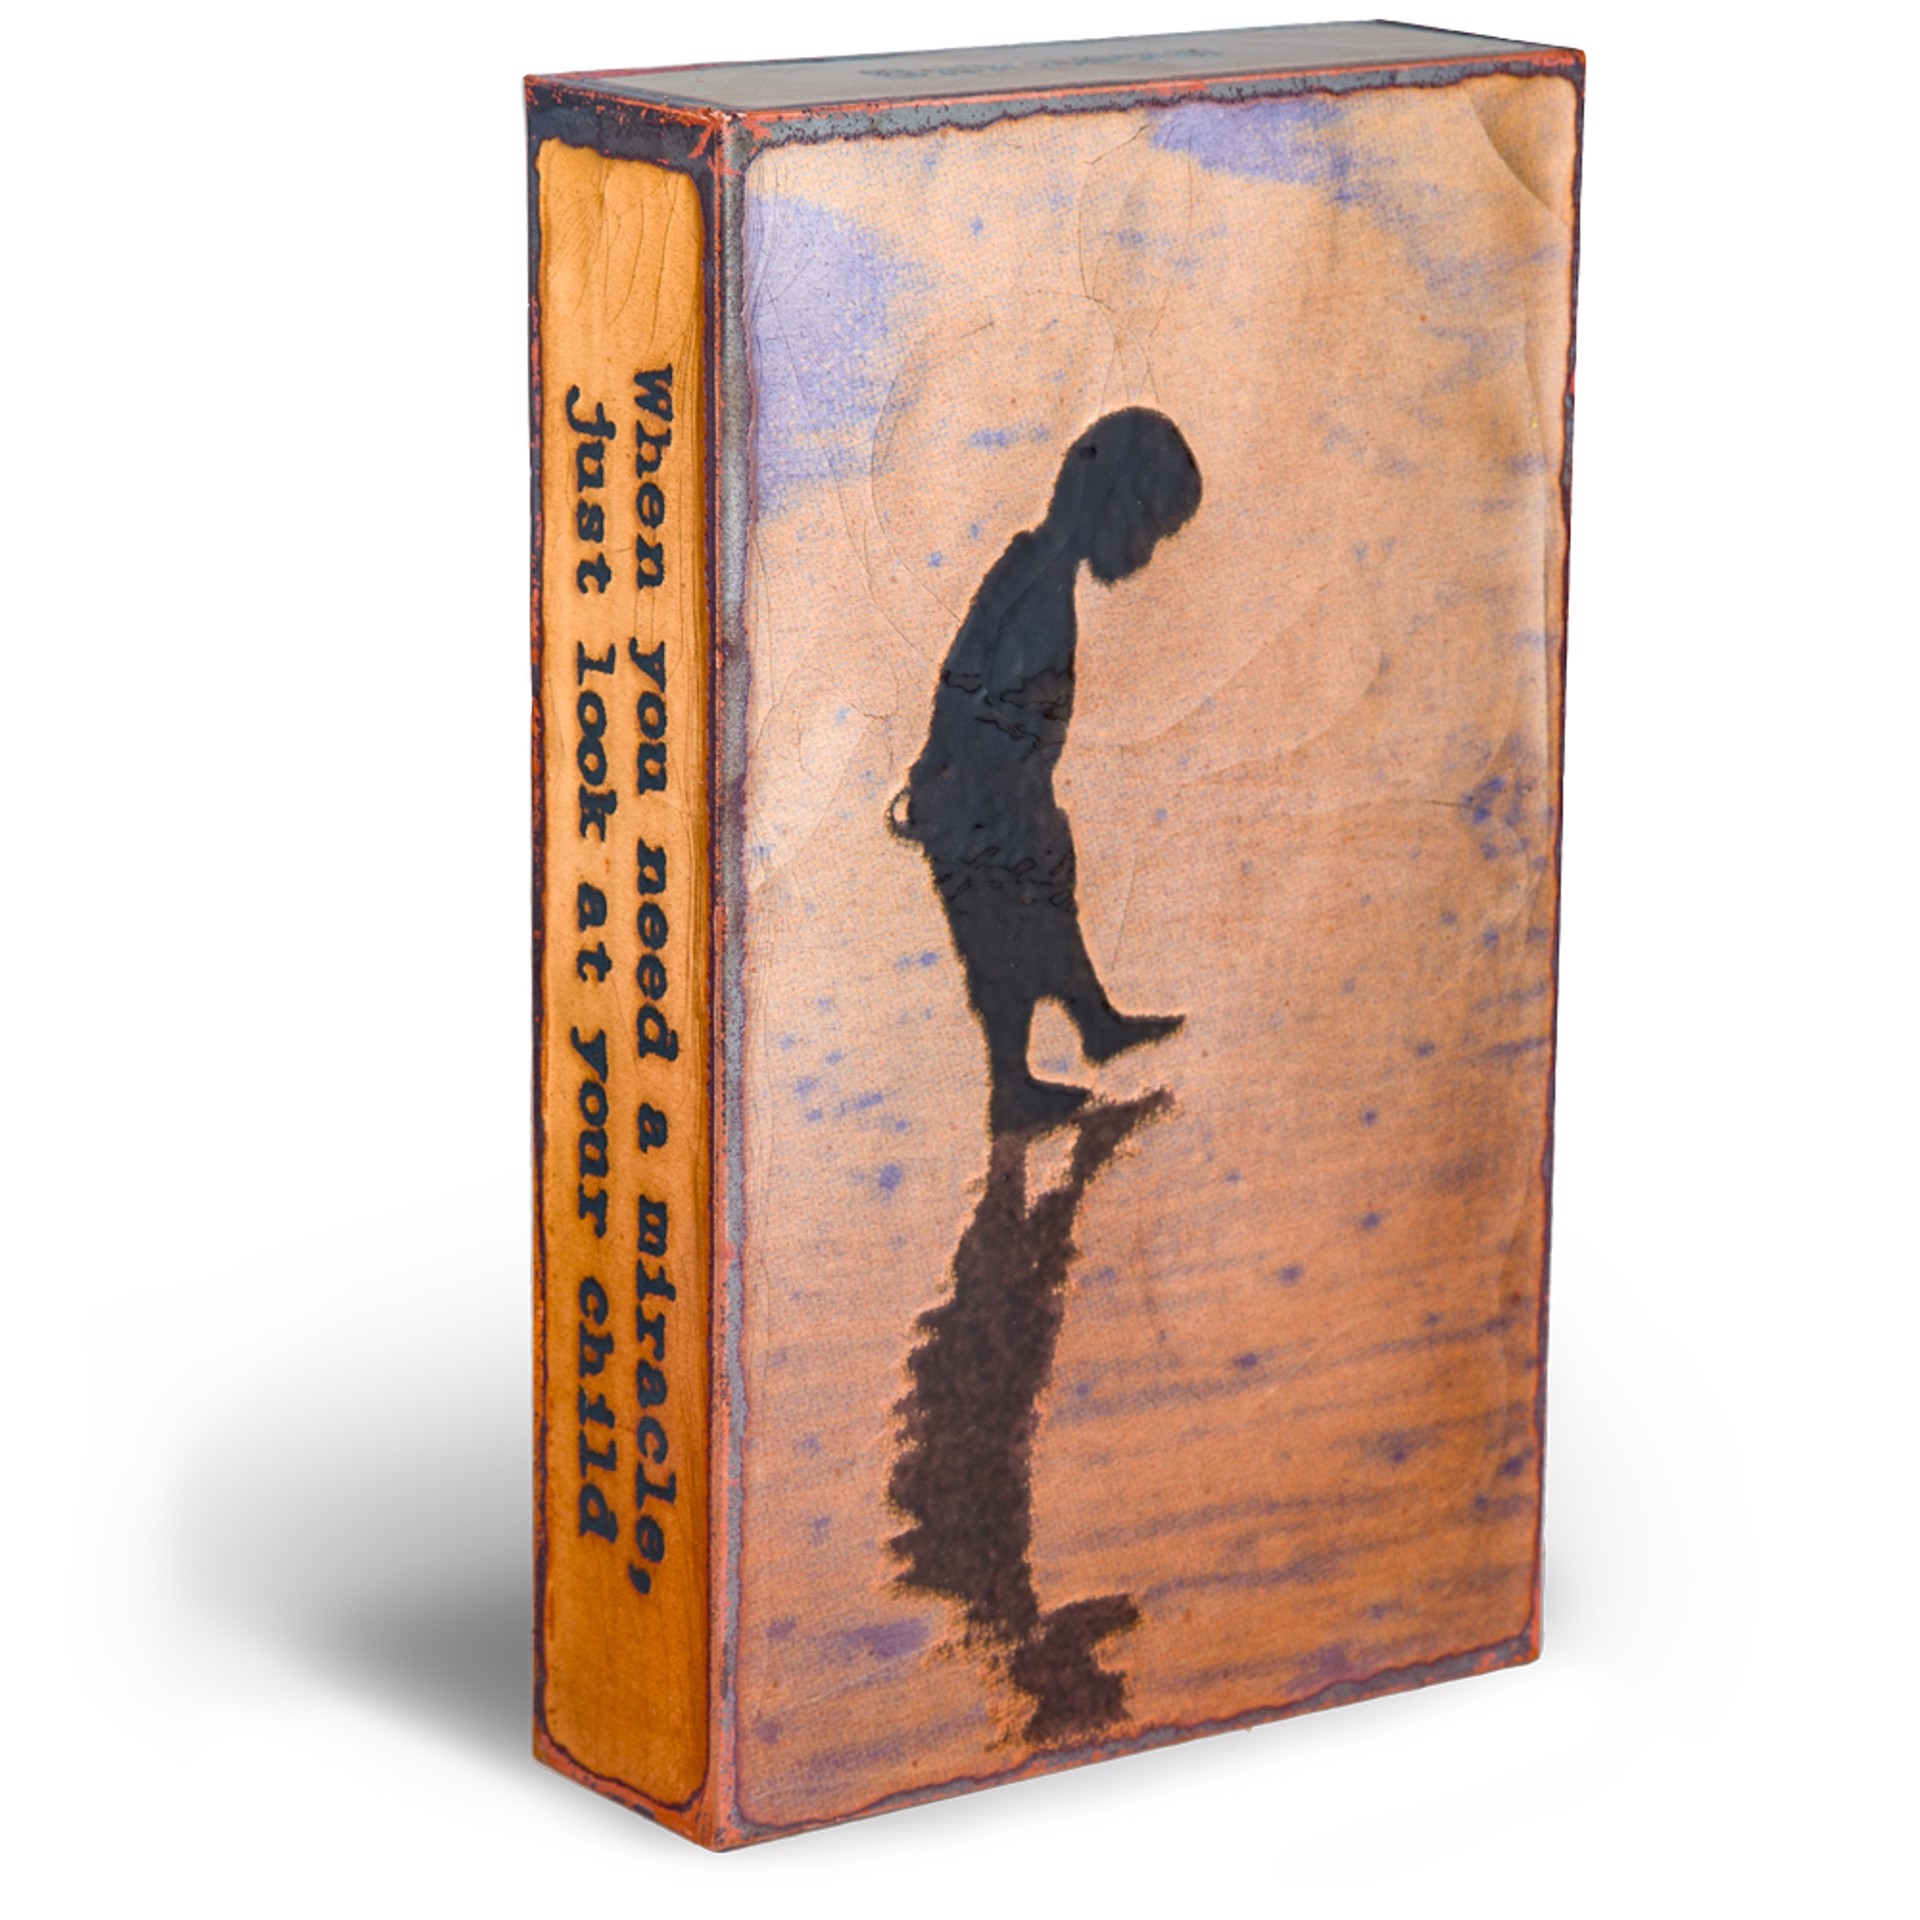 A Houston Llew Glass Fired To Copper Spiritile #153 Featuring A Child Silhouette And A Quote By Unknown, Available At Gallery Wild